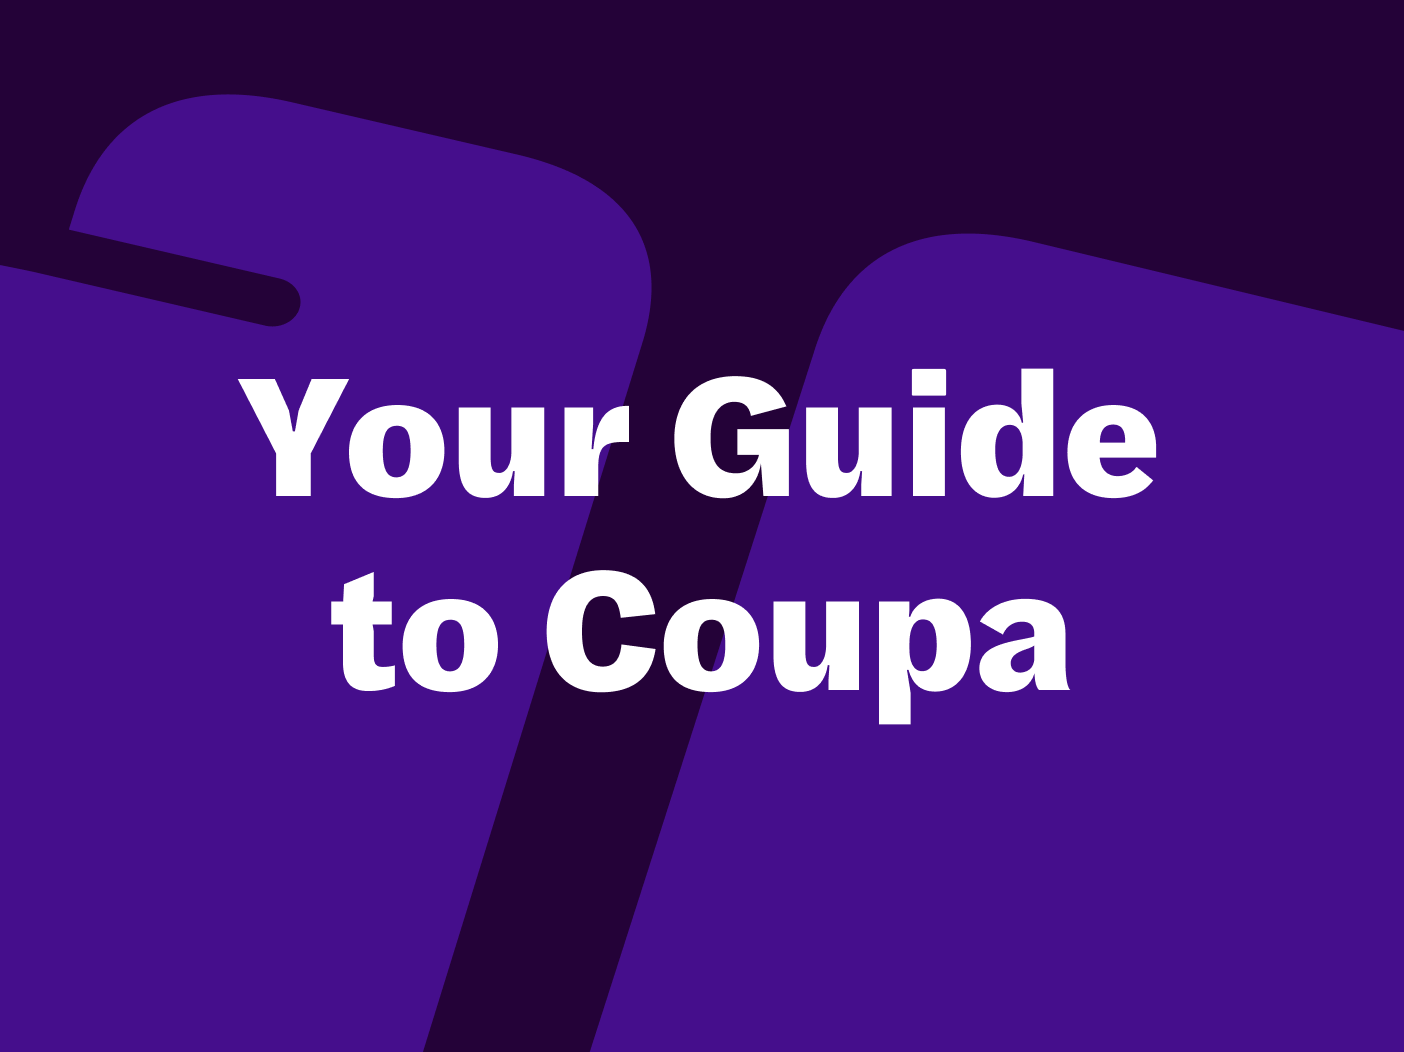 Your Guide to Coupa